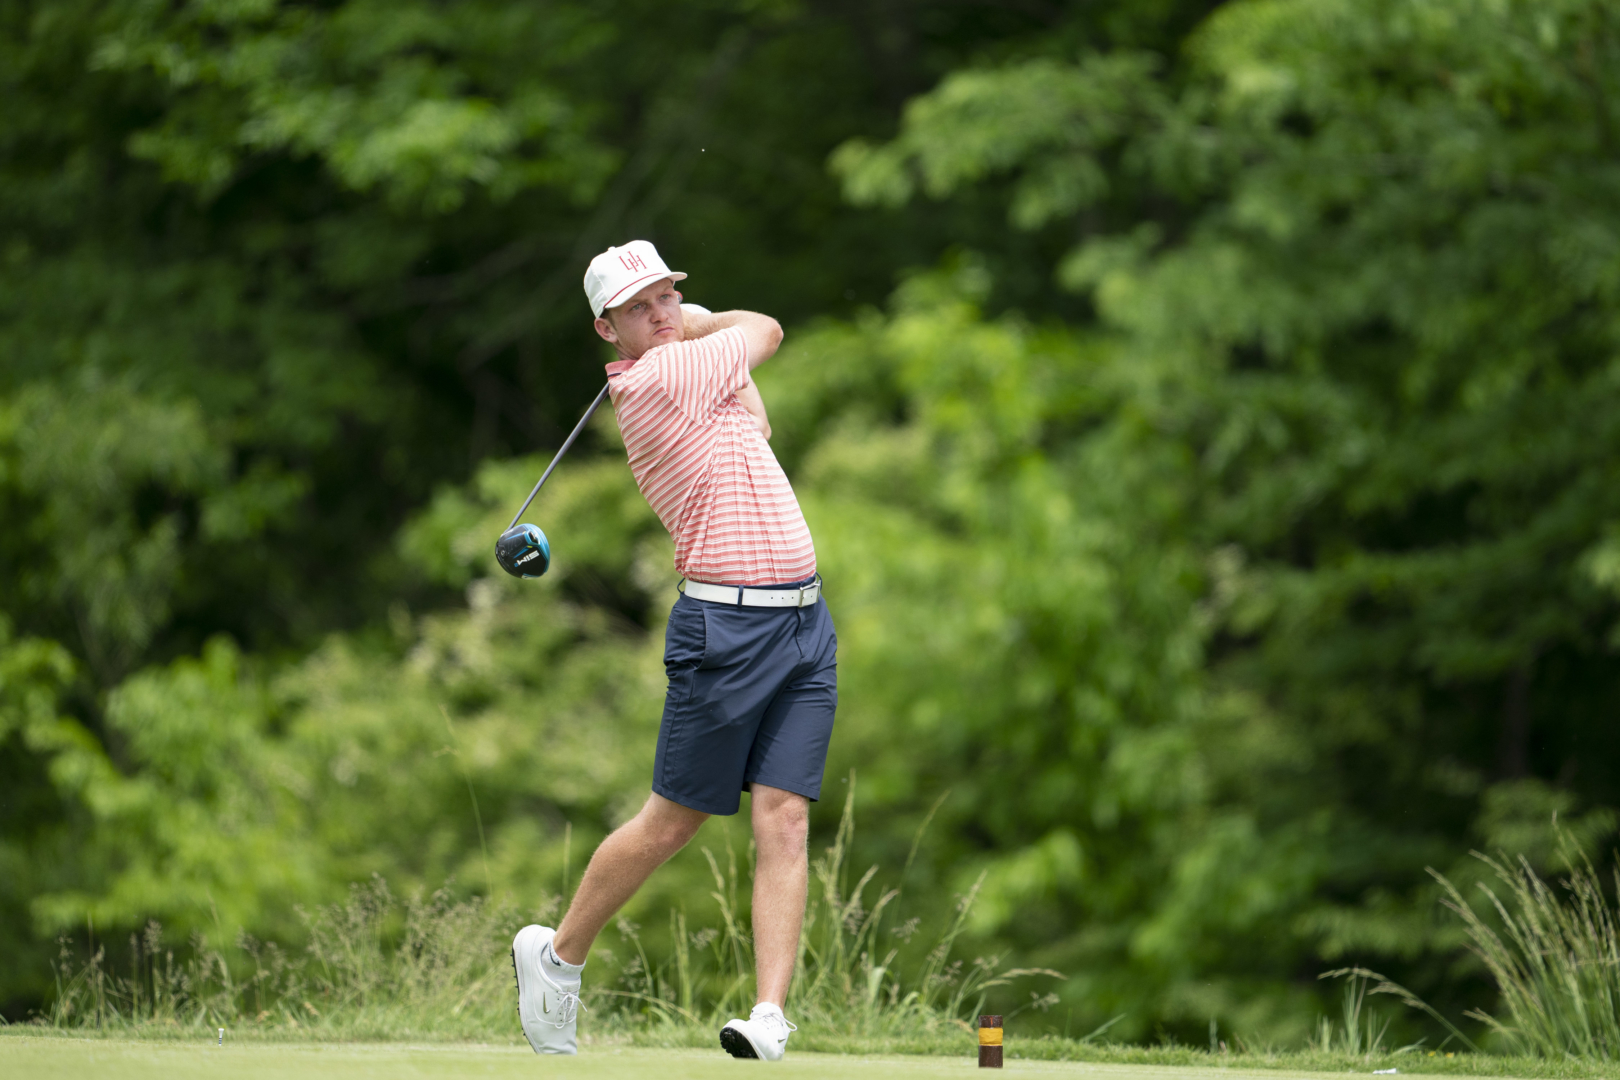 UH sophomore golfer Austyn Reily became the ninth Cougar in program history to win the Texas Amateur championship on Sunday at Midland Country Club. | Courtesy of UH athletics